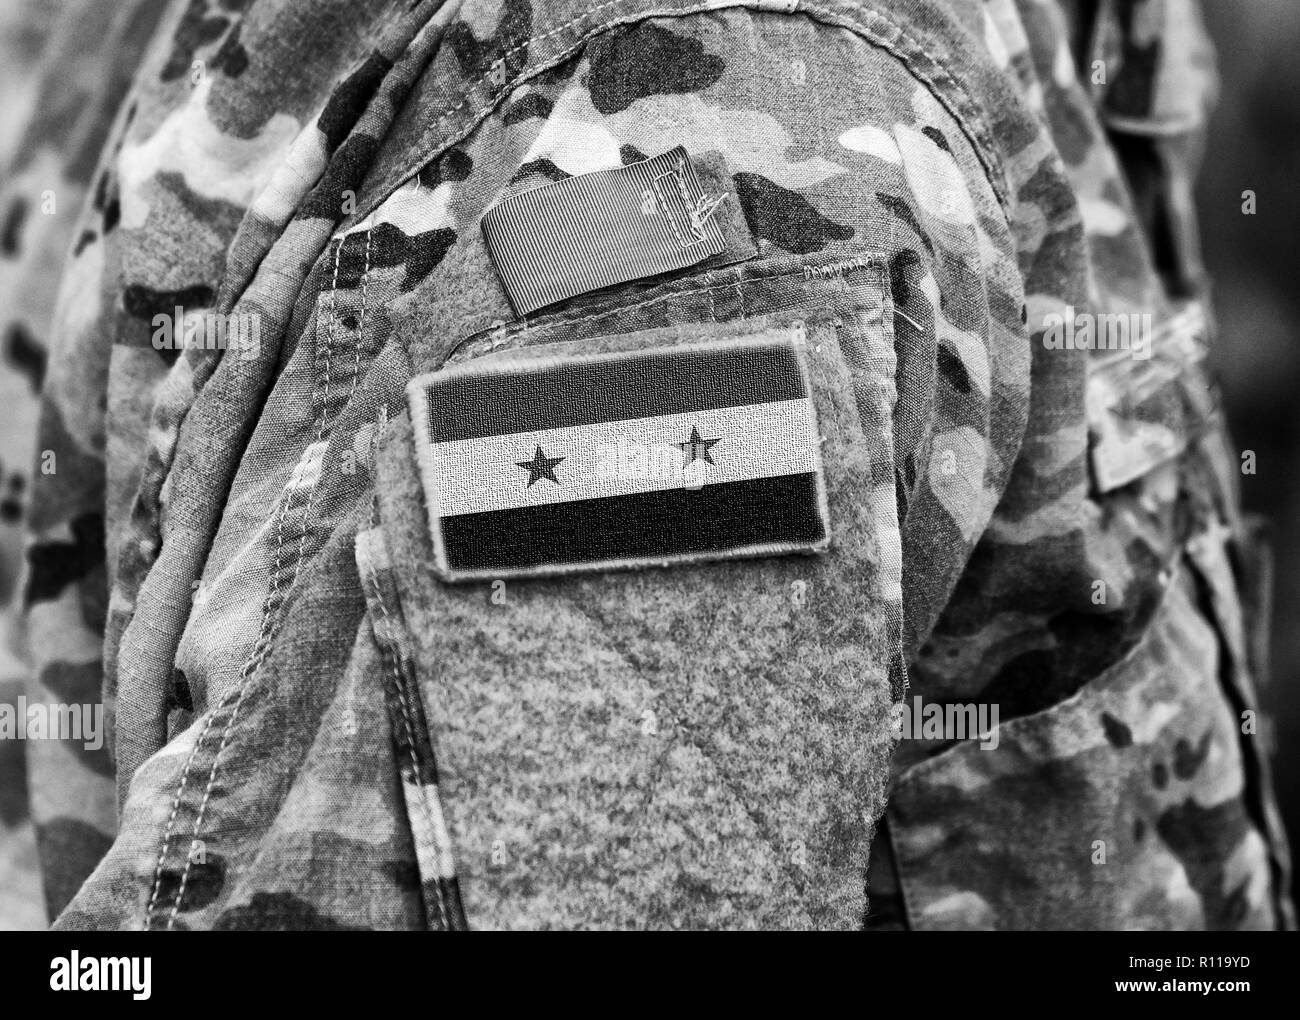 Syrian civil war soldiers Black and White Stock Photos & Images - Alamy